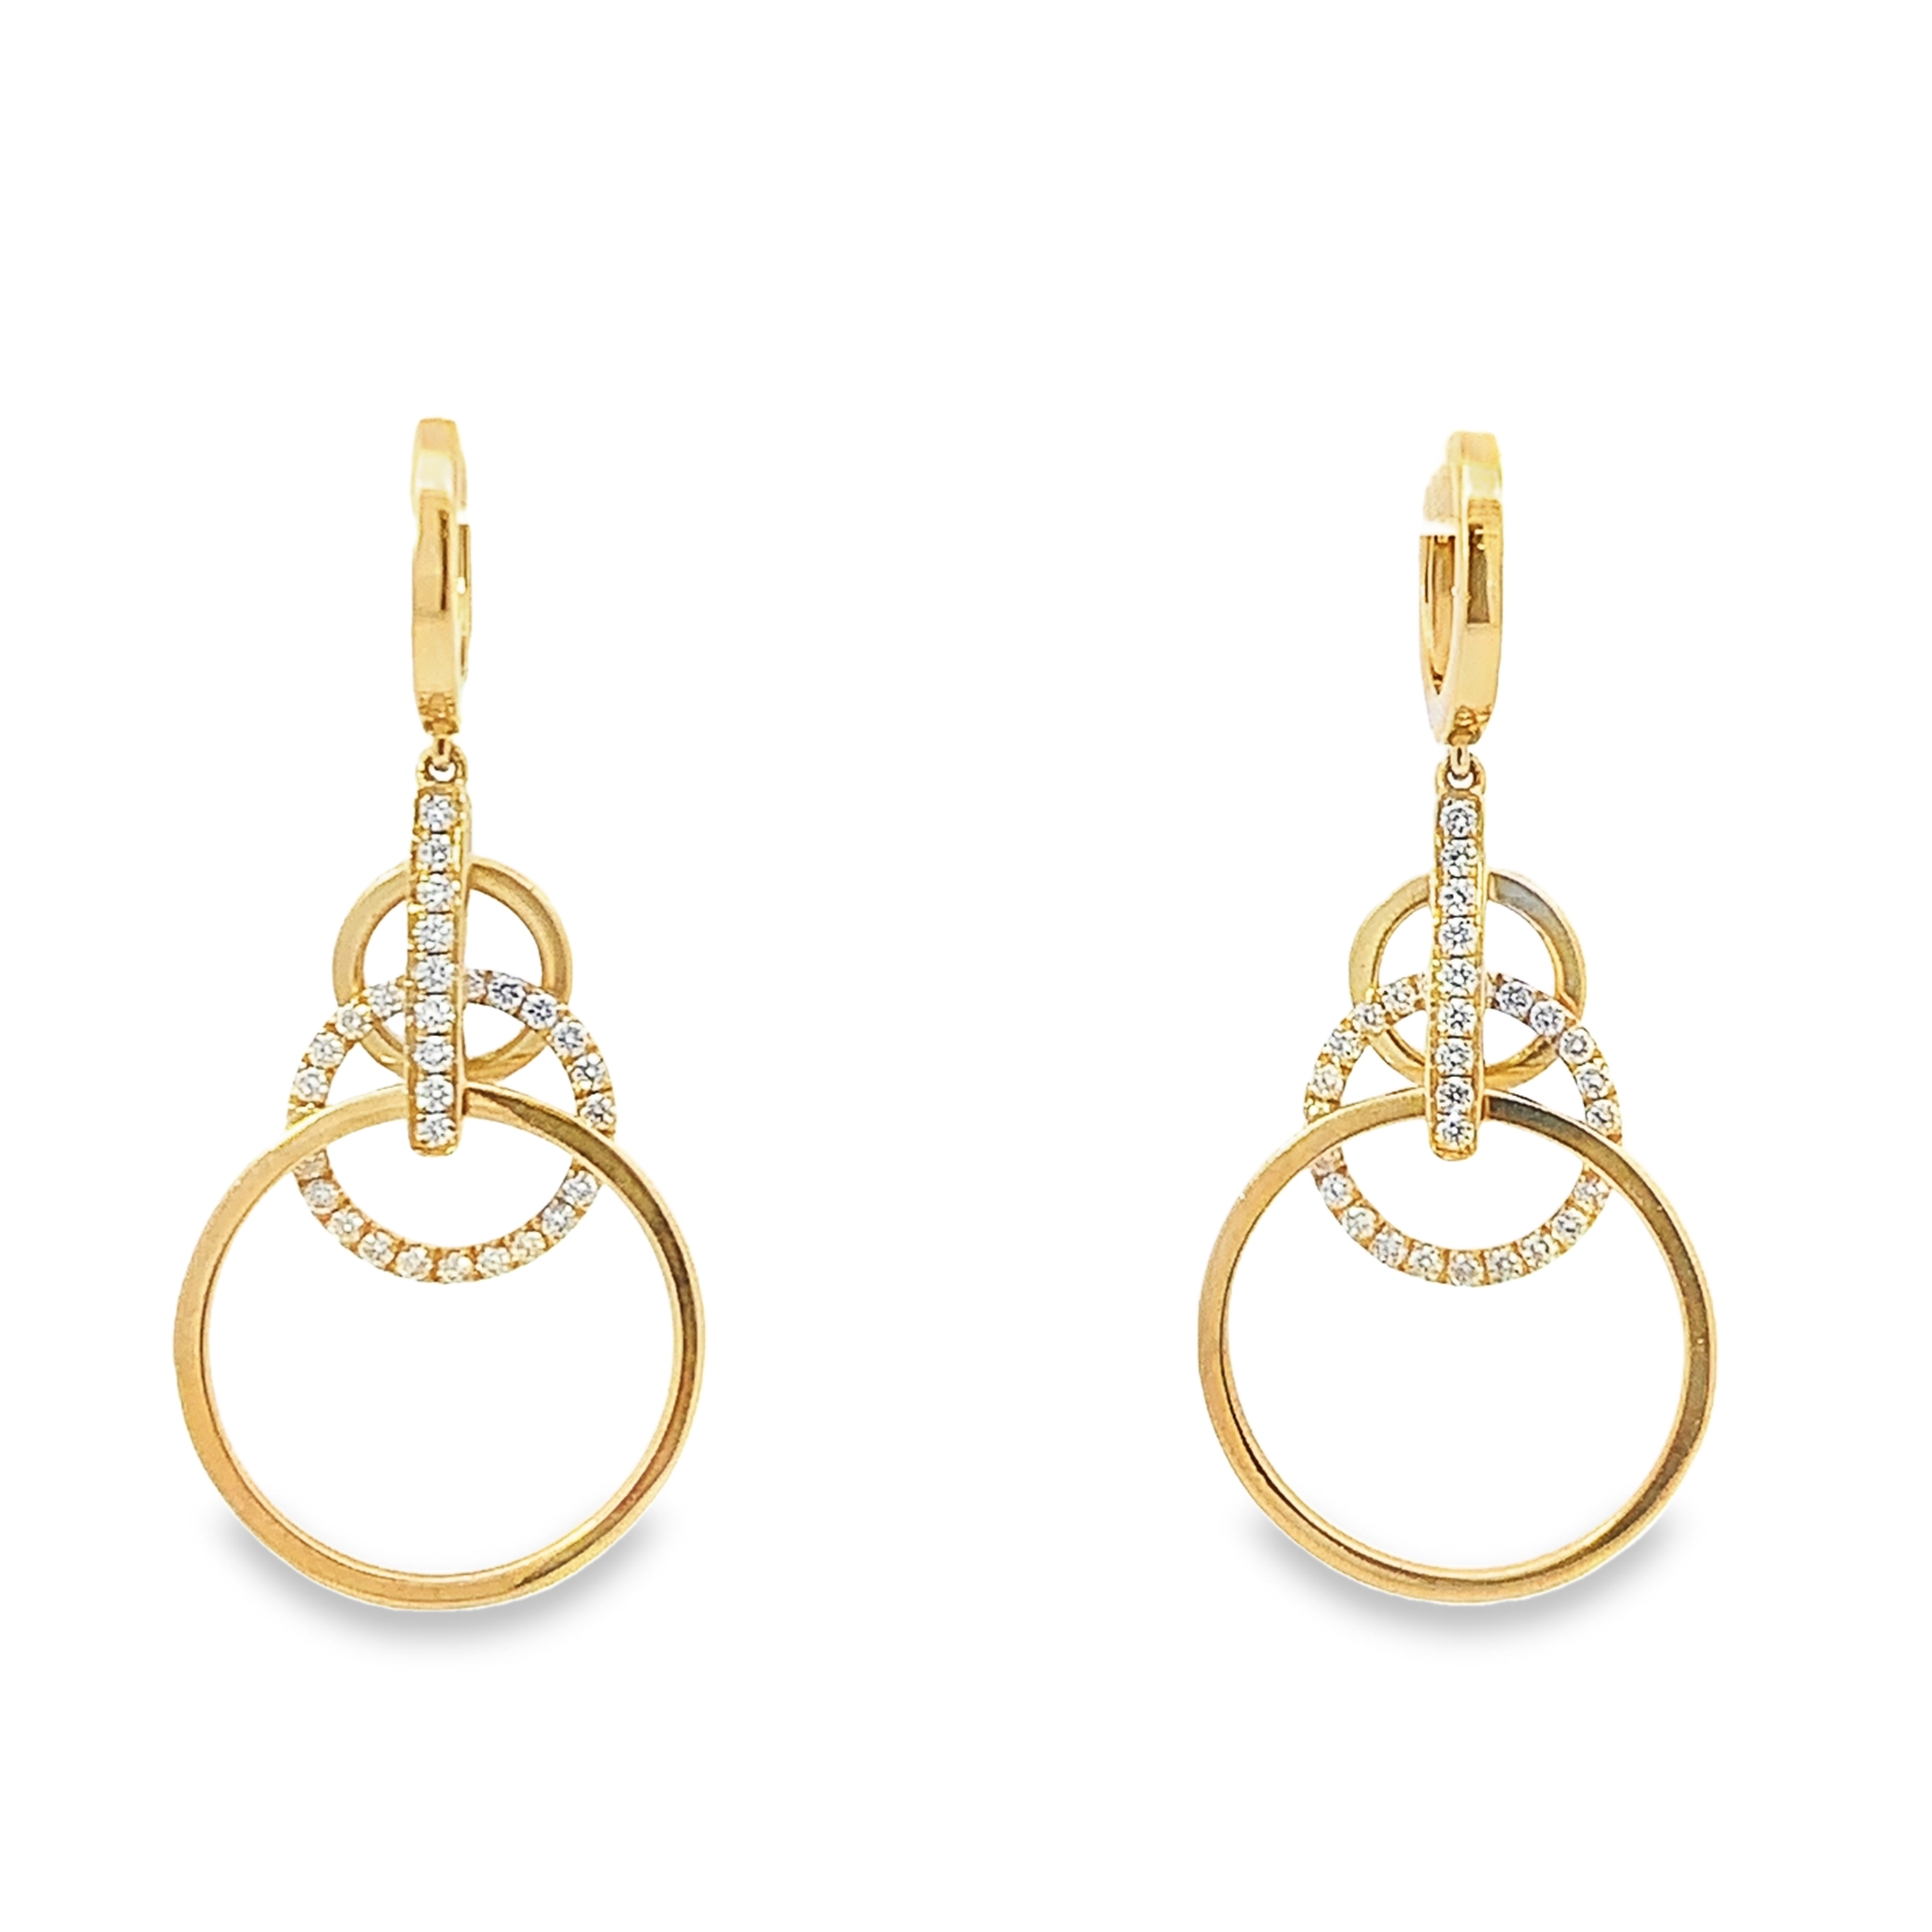 18K Yellow Gold Earrings with Round Brilliant Cut Diamonds 0.59 Tcw